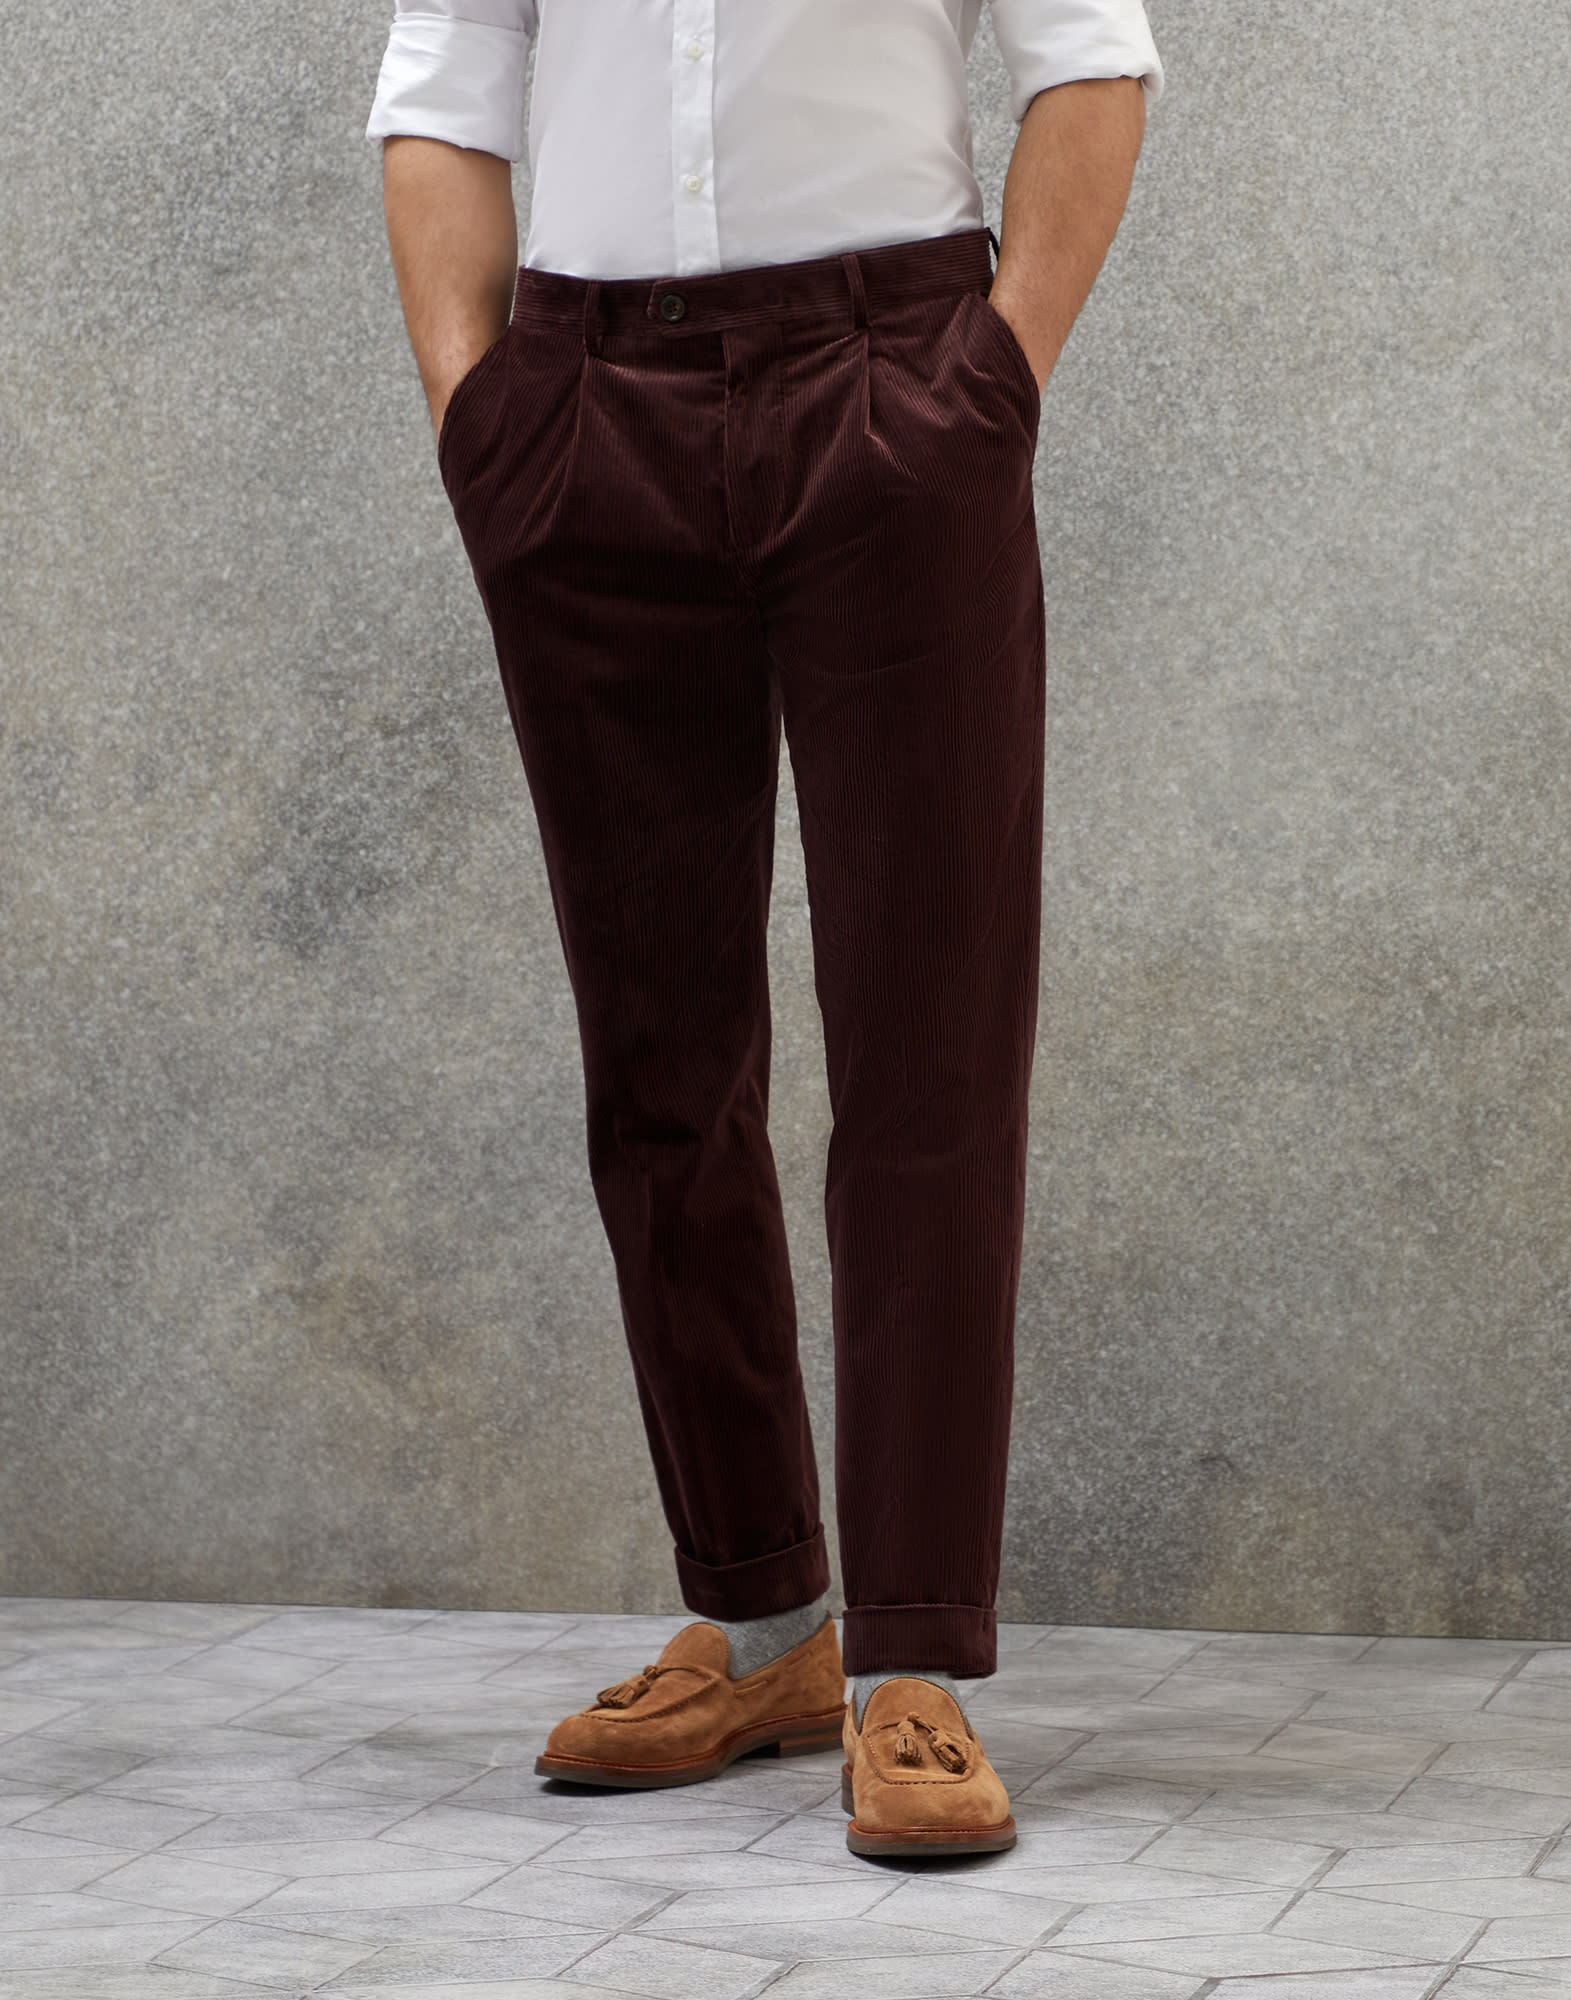 Buy Arrow Pleated Front Corduroy Trousers - NNNOW.com